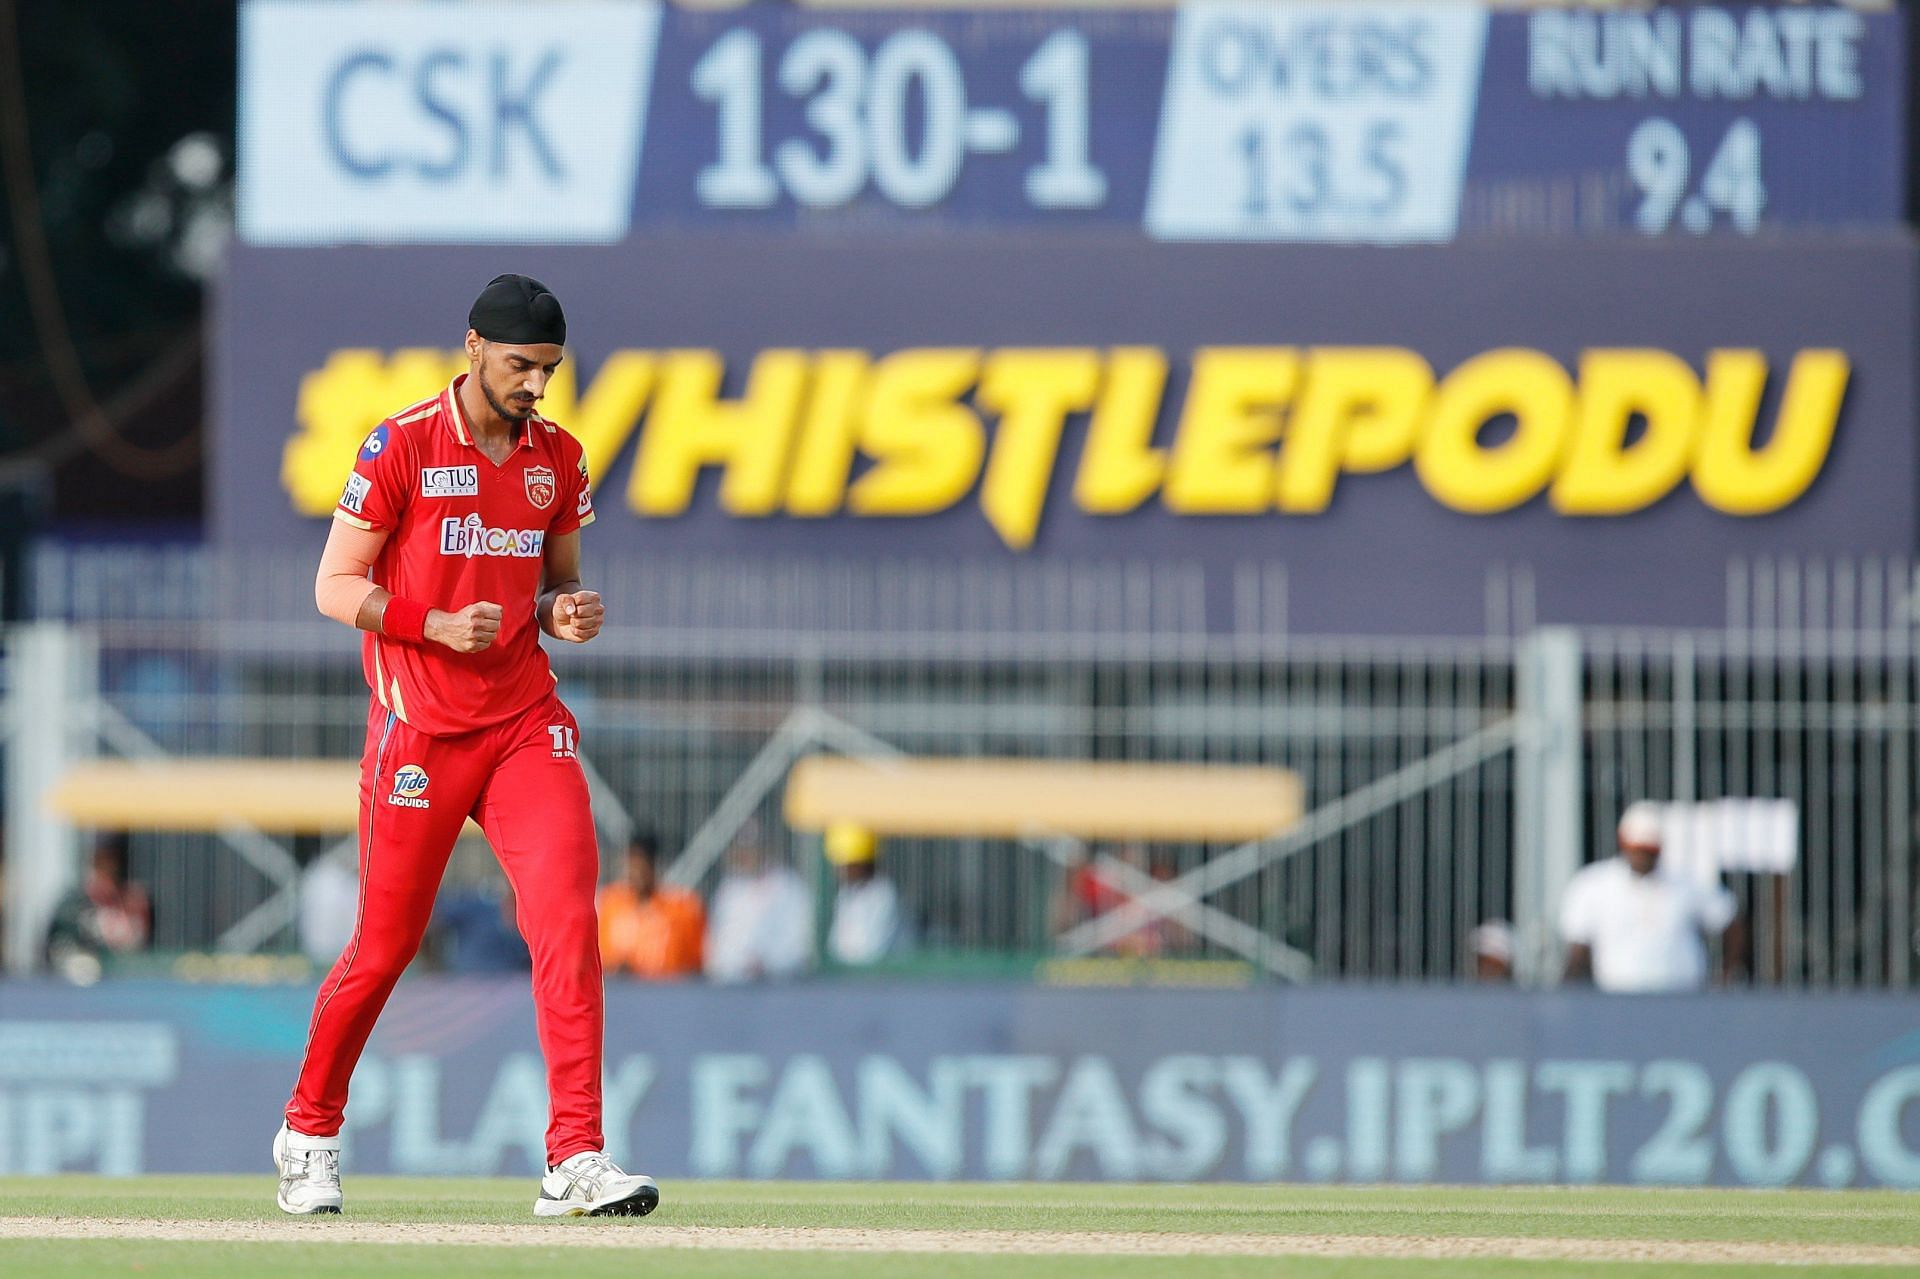 Arshdeep Singh in action against CSK (Image Courtesy: Twitter/Punjab Kings)